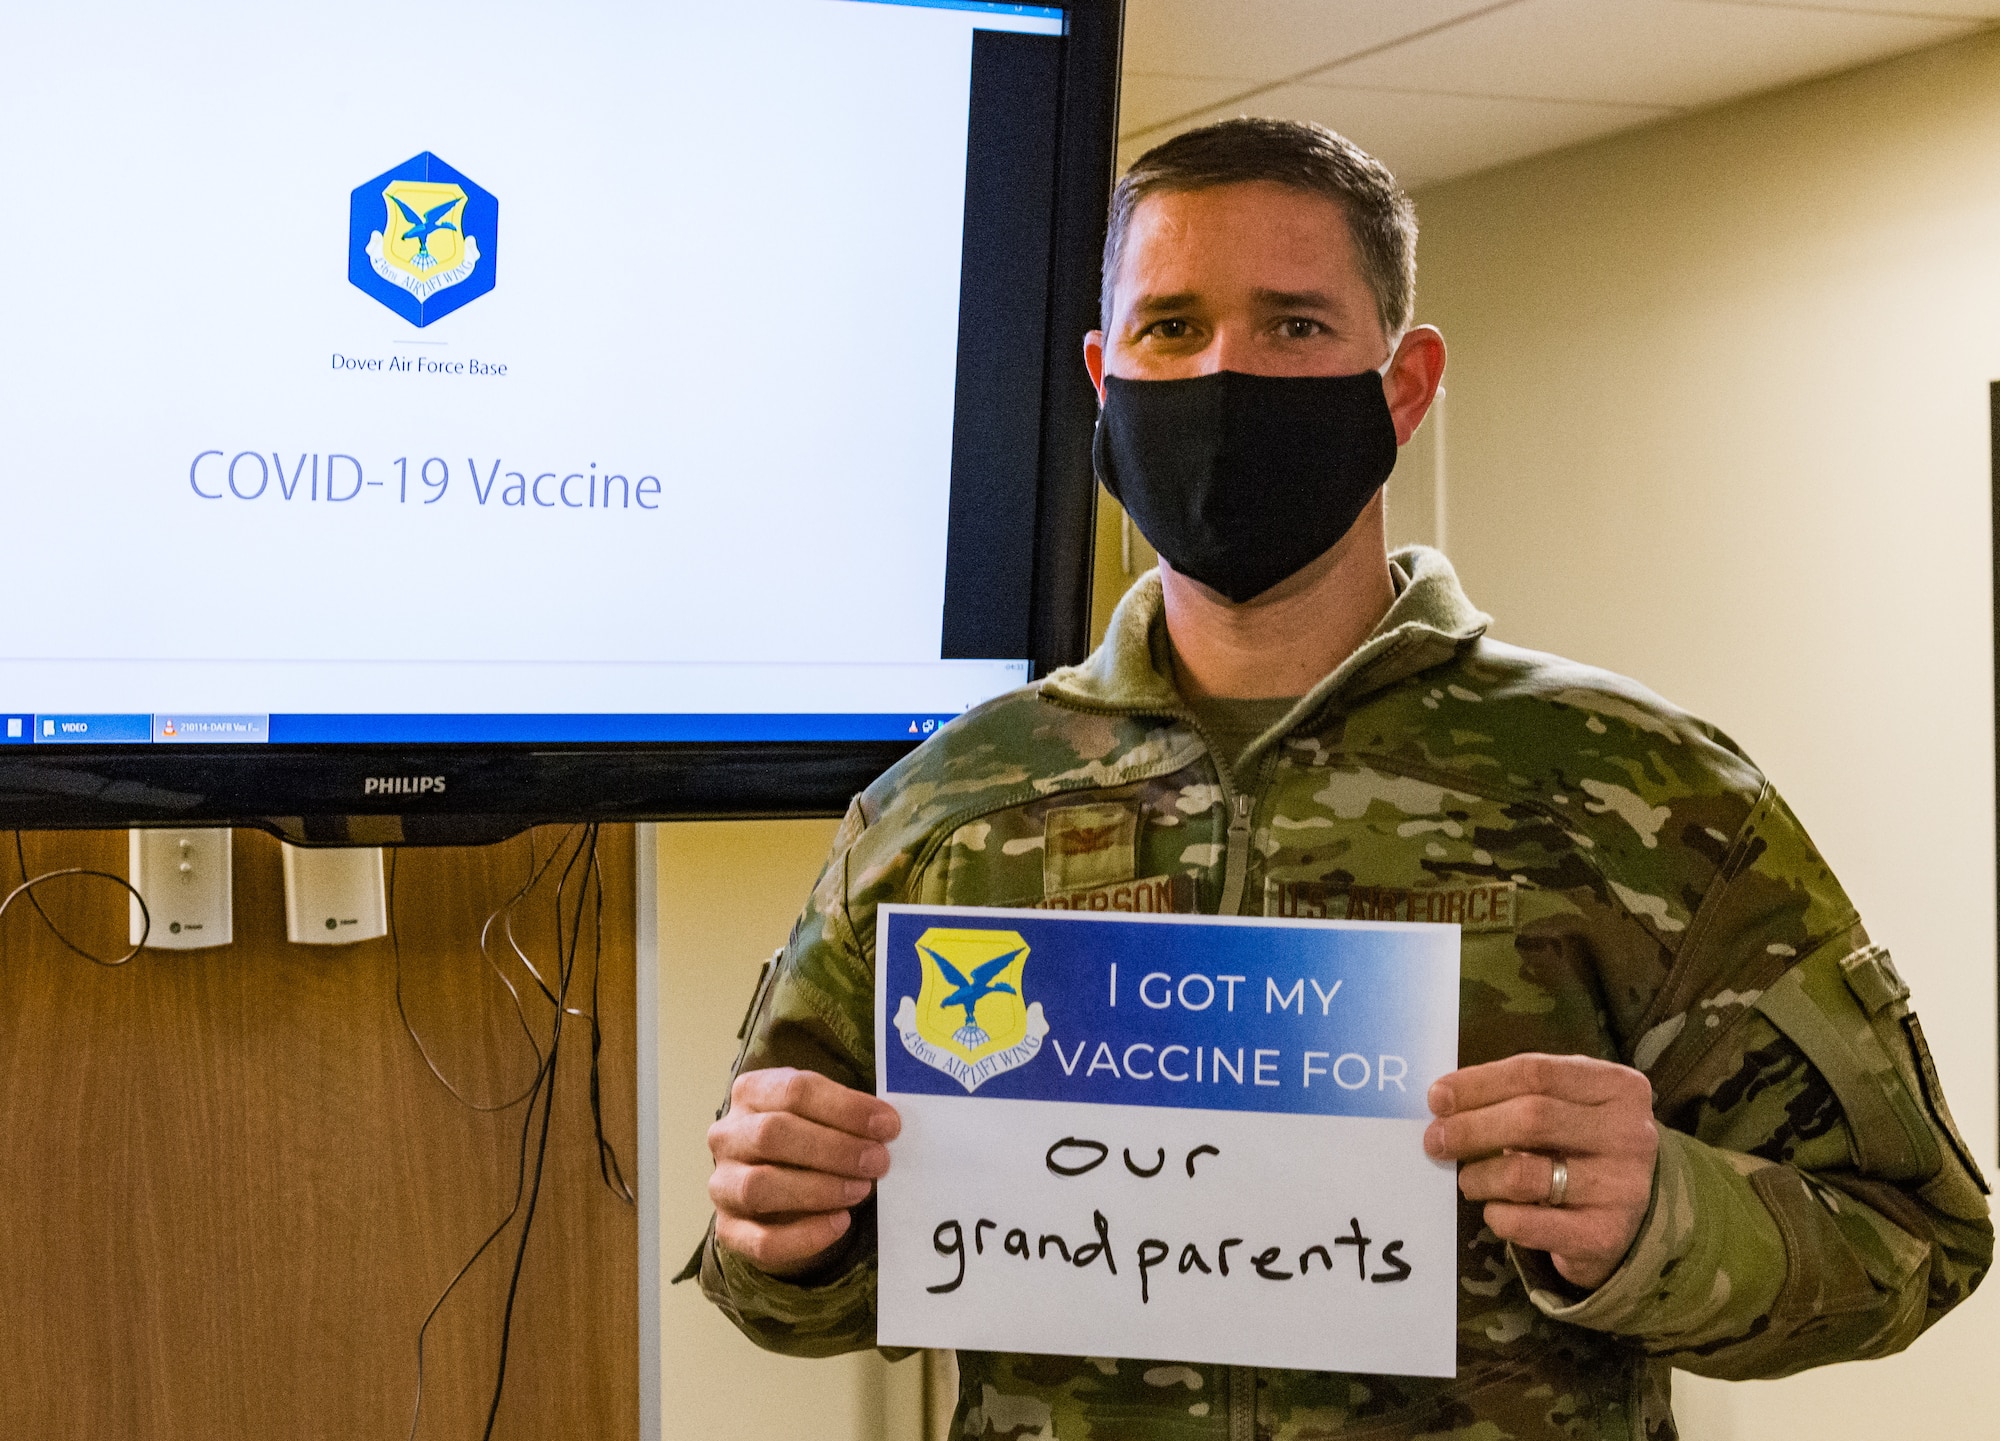 Col. Shanon Anderson, 436th Airlift Wing vice commander, displays a sign stating why he volunteered for the COVID-19 vaccination Jan. 20, 2021, at Dover Air Force Base, Delaware. Anderson was among the first Team Dover senior leaders who voluntarily received the vaccine in accordance with Department of Defense guidance. The vaccine was granted emergency use authorization by the U.S. Food and Drug Administration for use in prevention of COVID-19. (U.S. Air Force photo by Roland Balik)